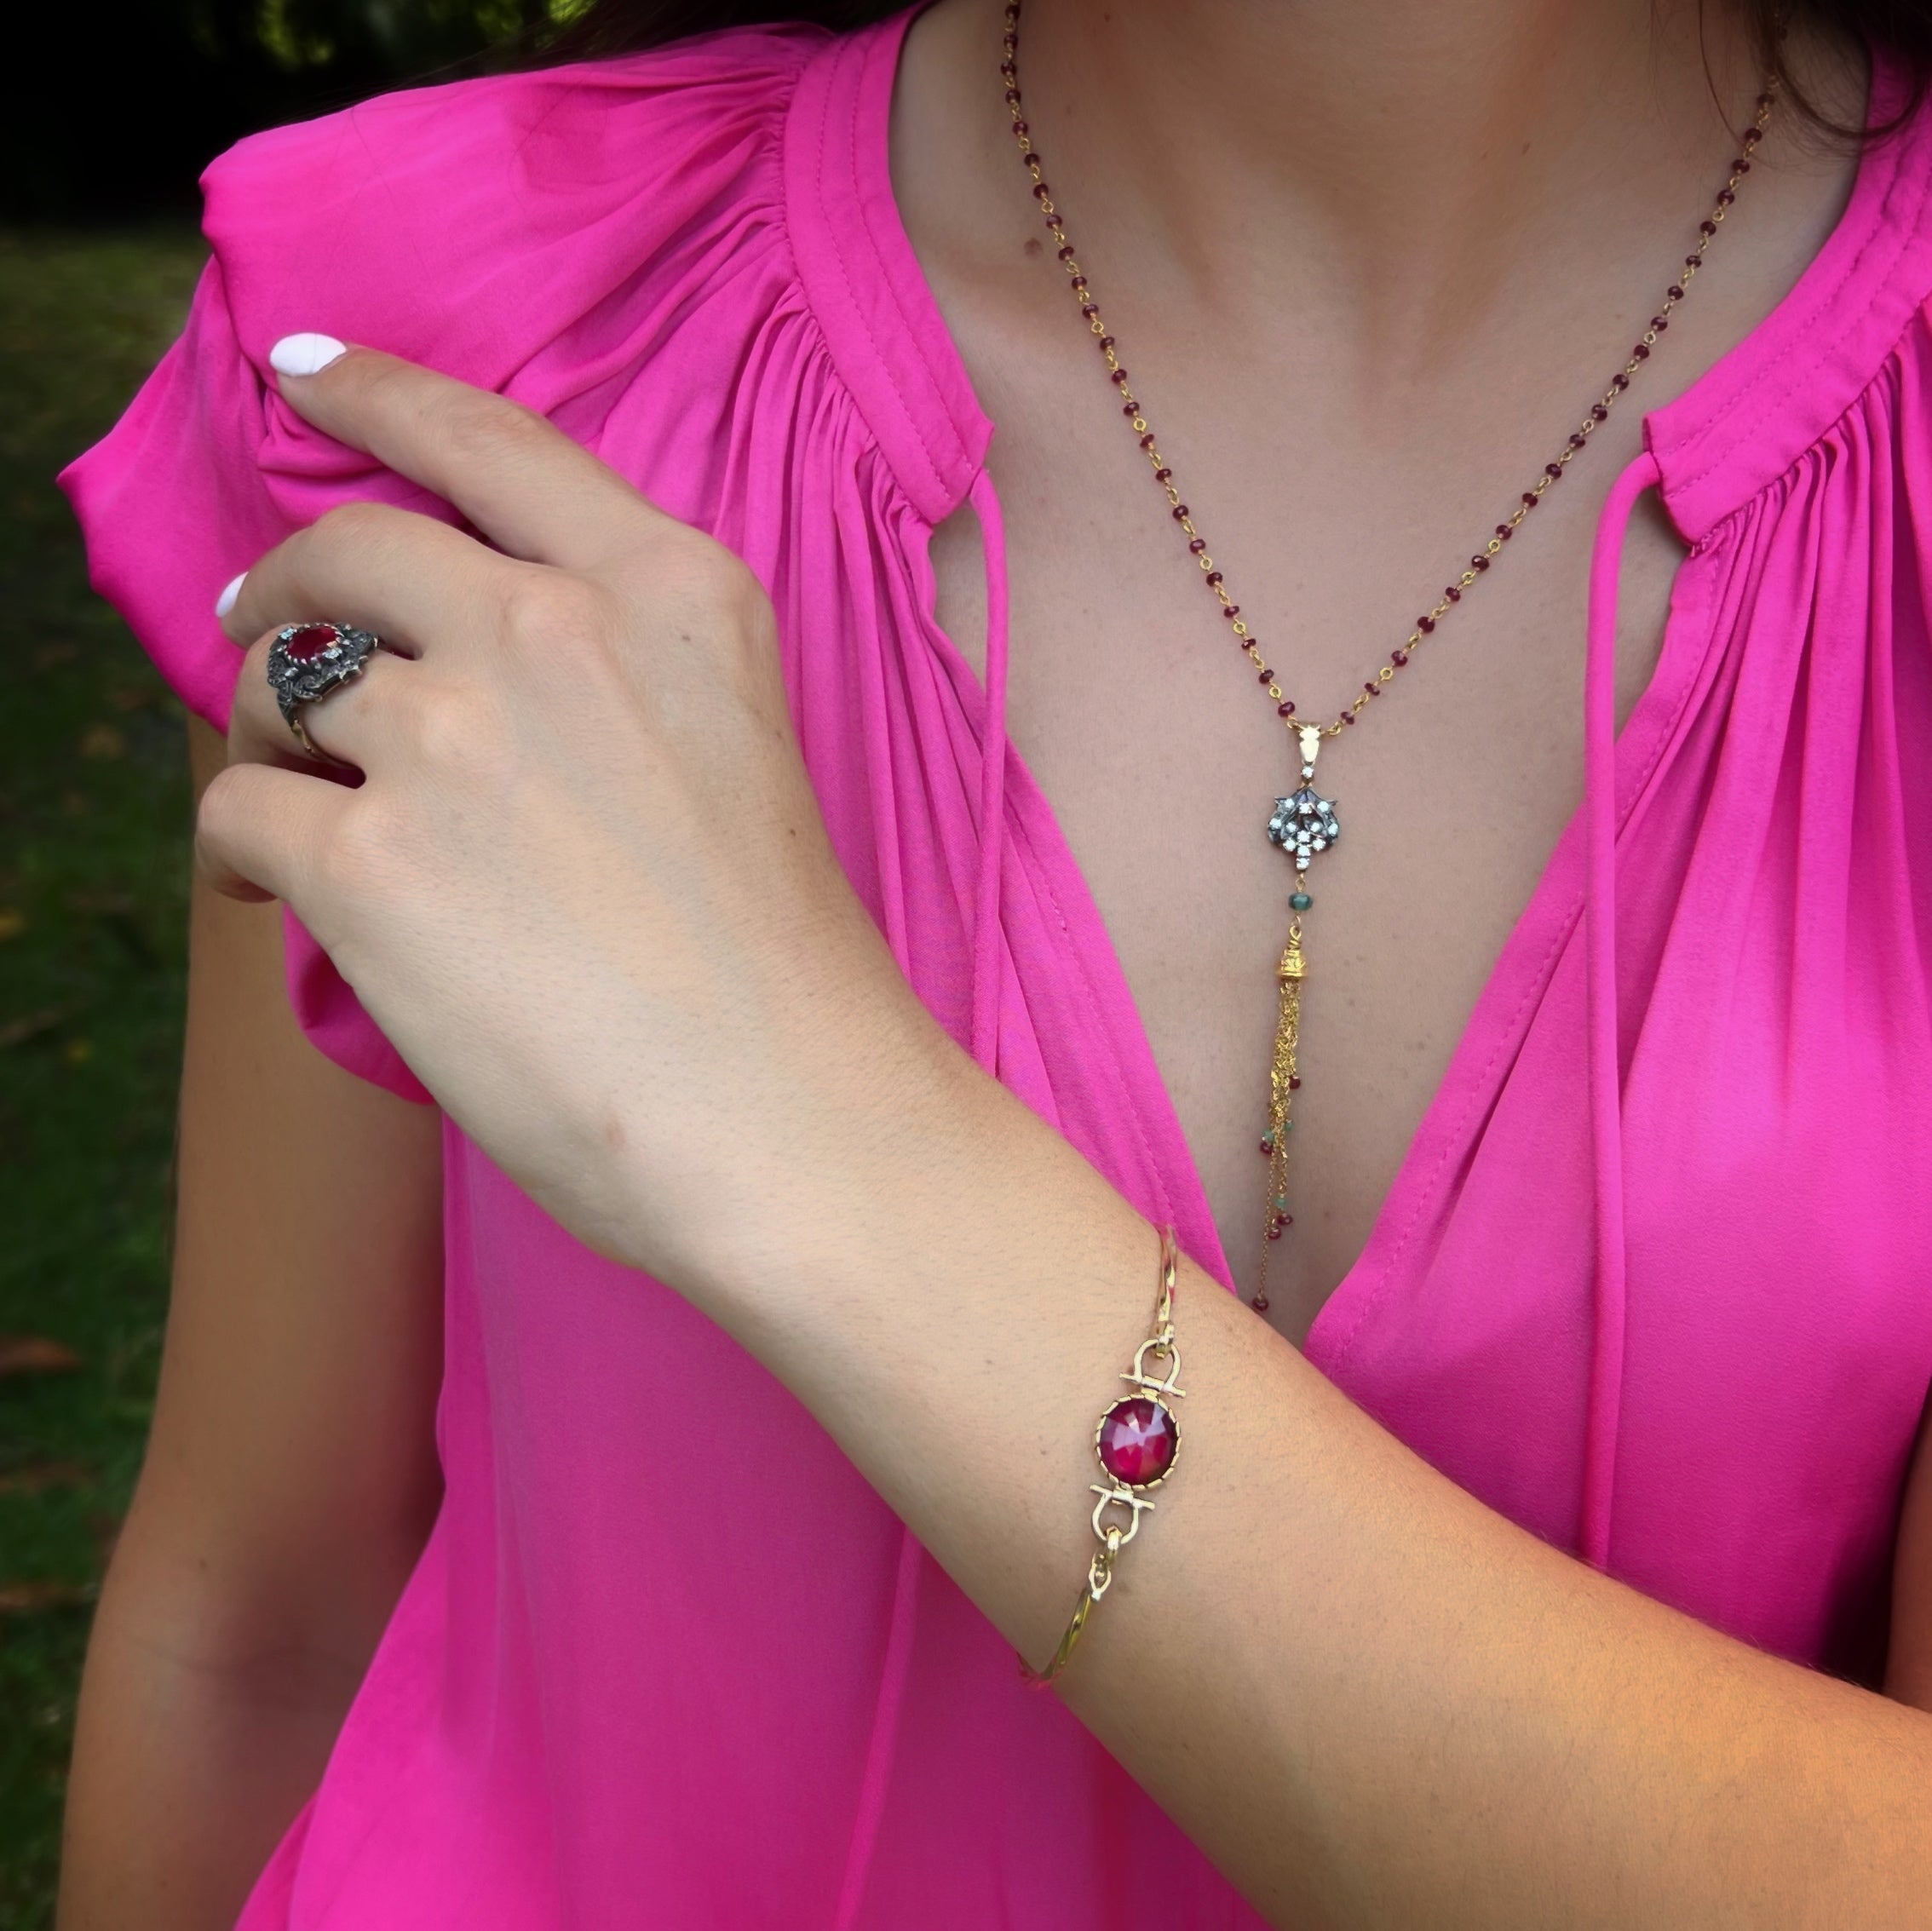 Stylish Hand Model with Gold and Ruby Bracelet - A fashionable hand model displaying the striking Gold Ruby Bangle Bracelet, adding a touch of glamour to any ensemble.